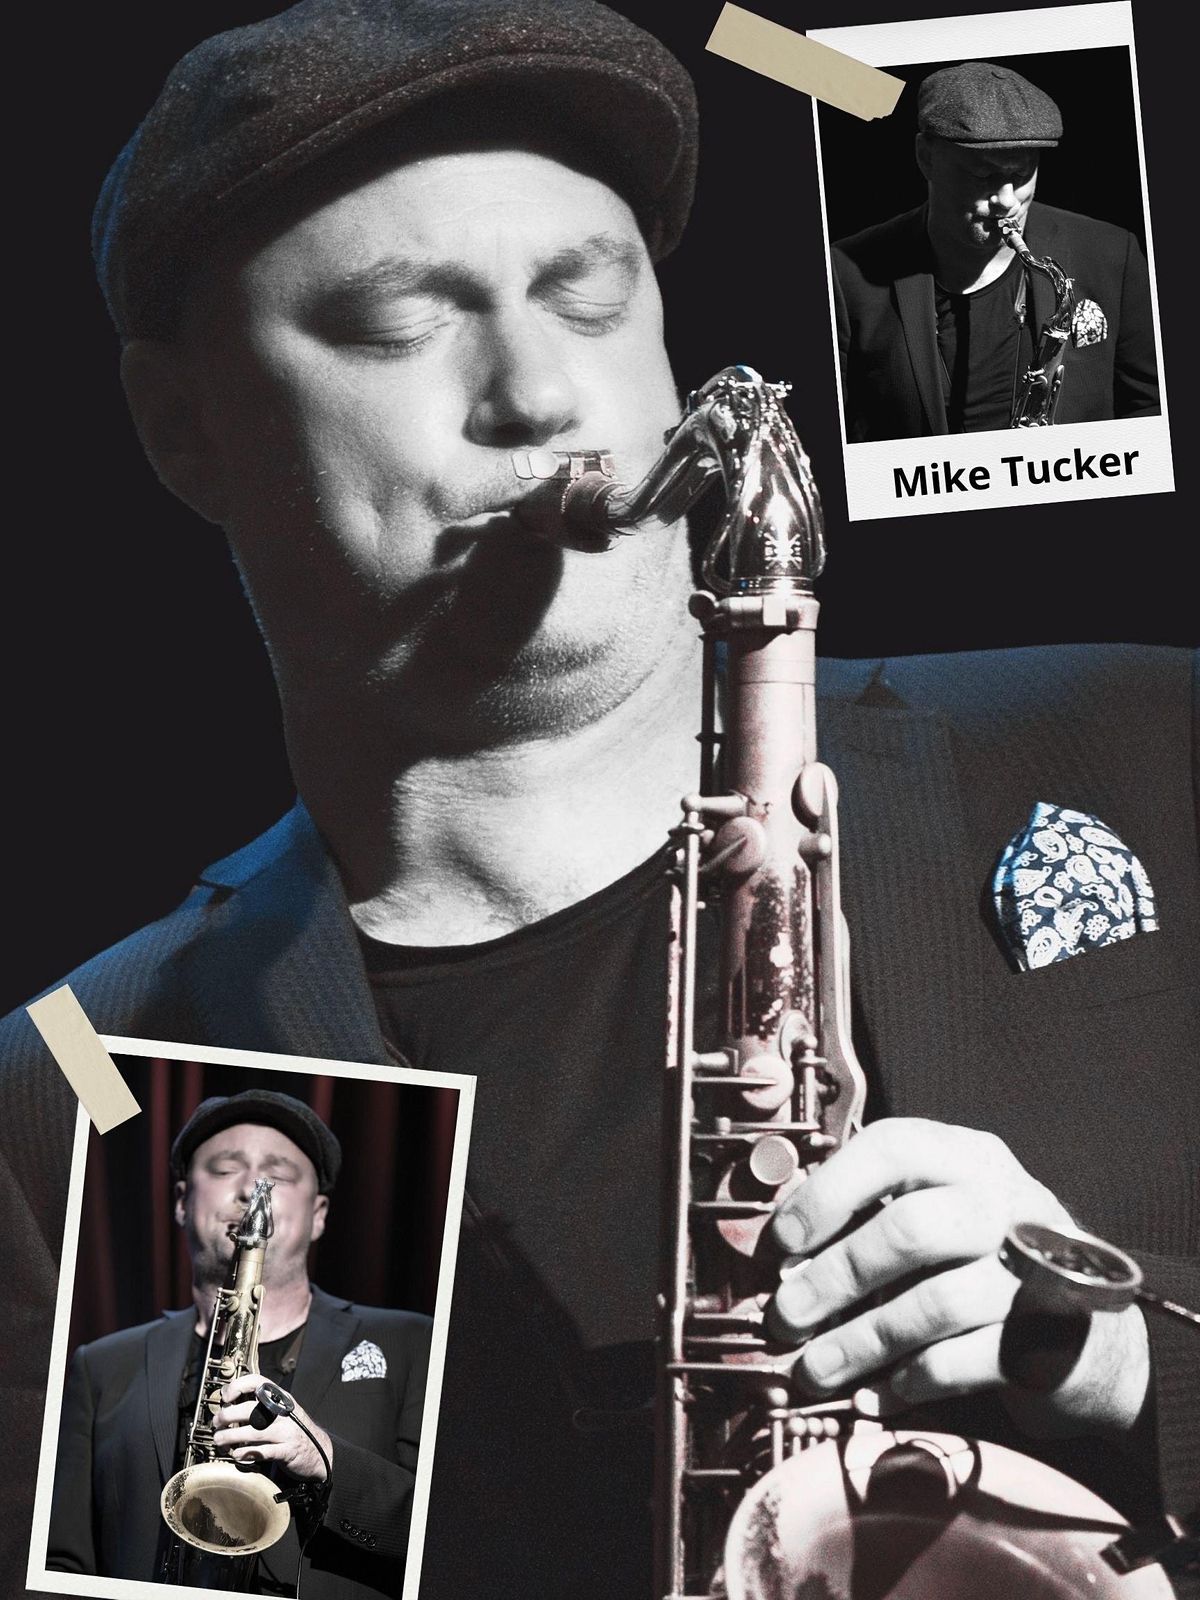 FOURTH SUNDAY SOIREE               -            FEATURED ARTIST MIKE TUCKER